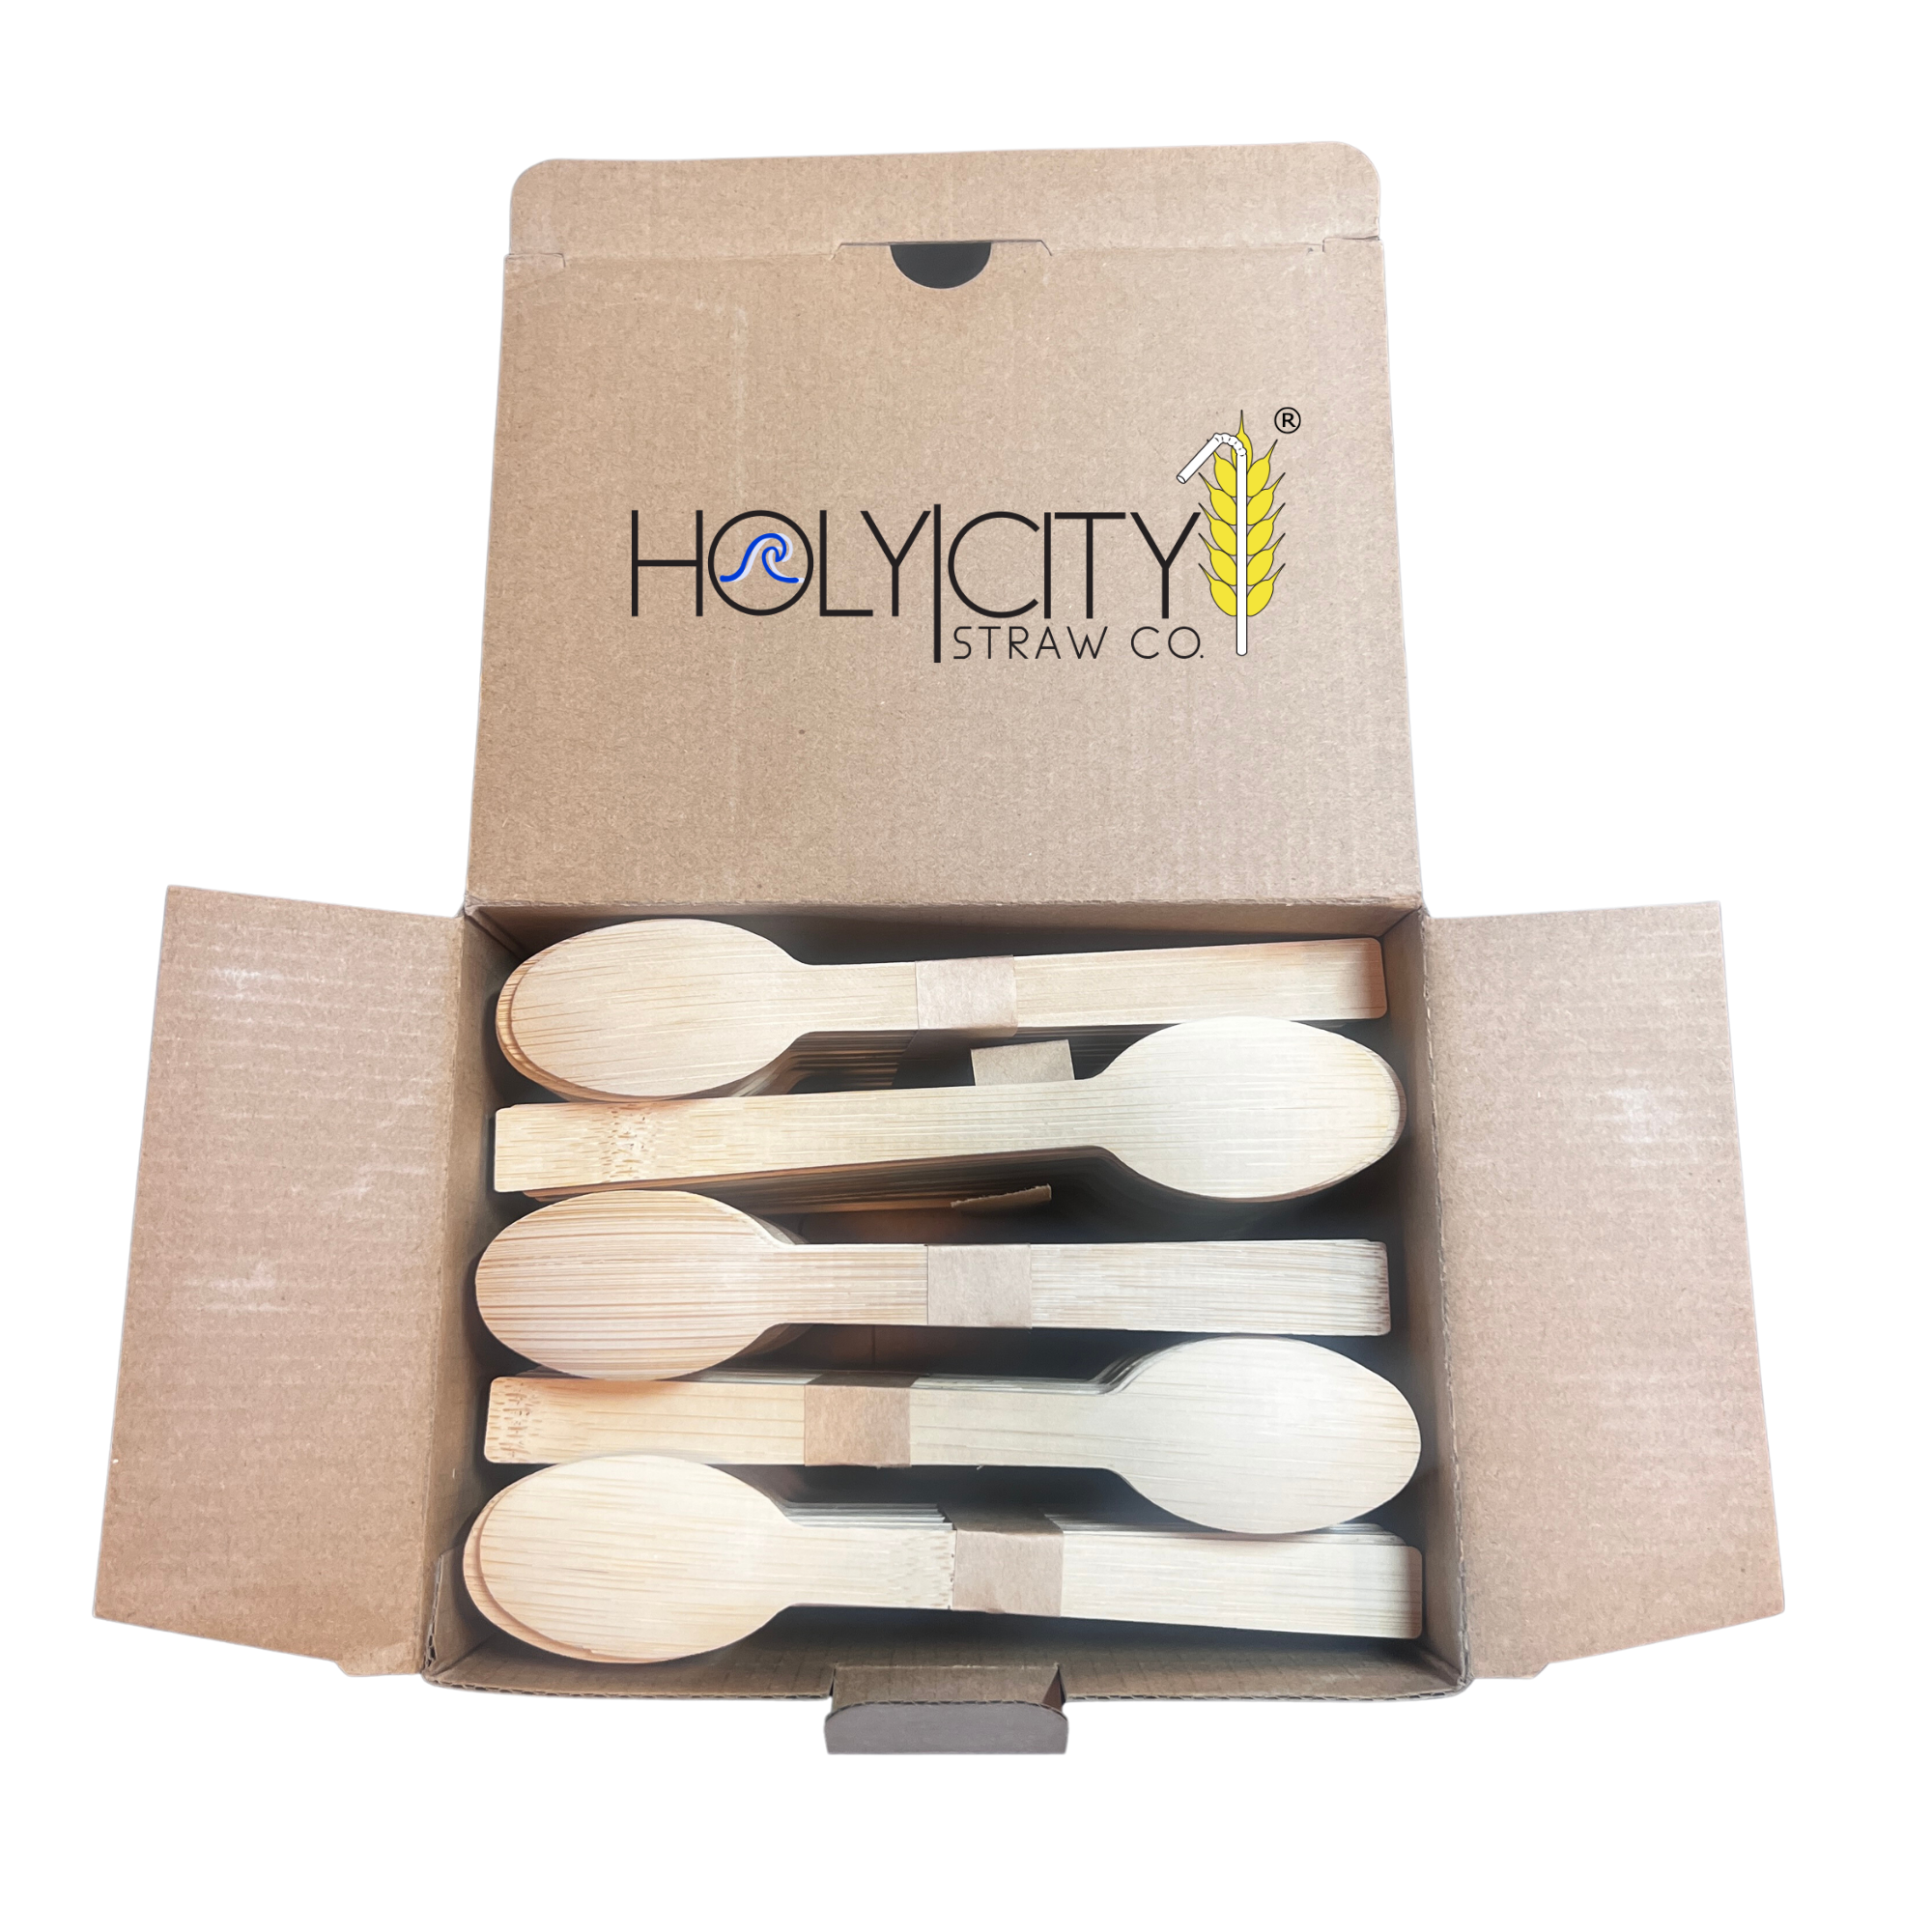 Holy City Straw Co. 500 count open box of unwrapped taster spoon